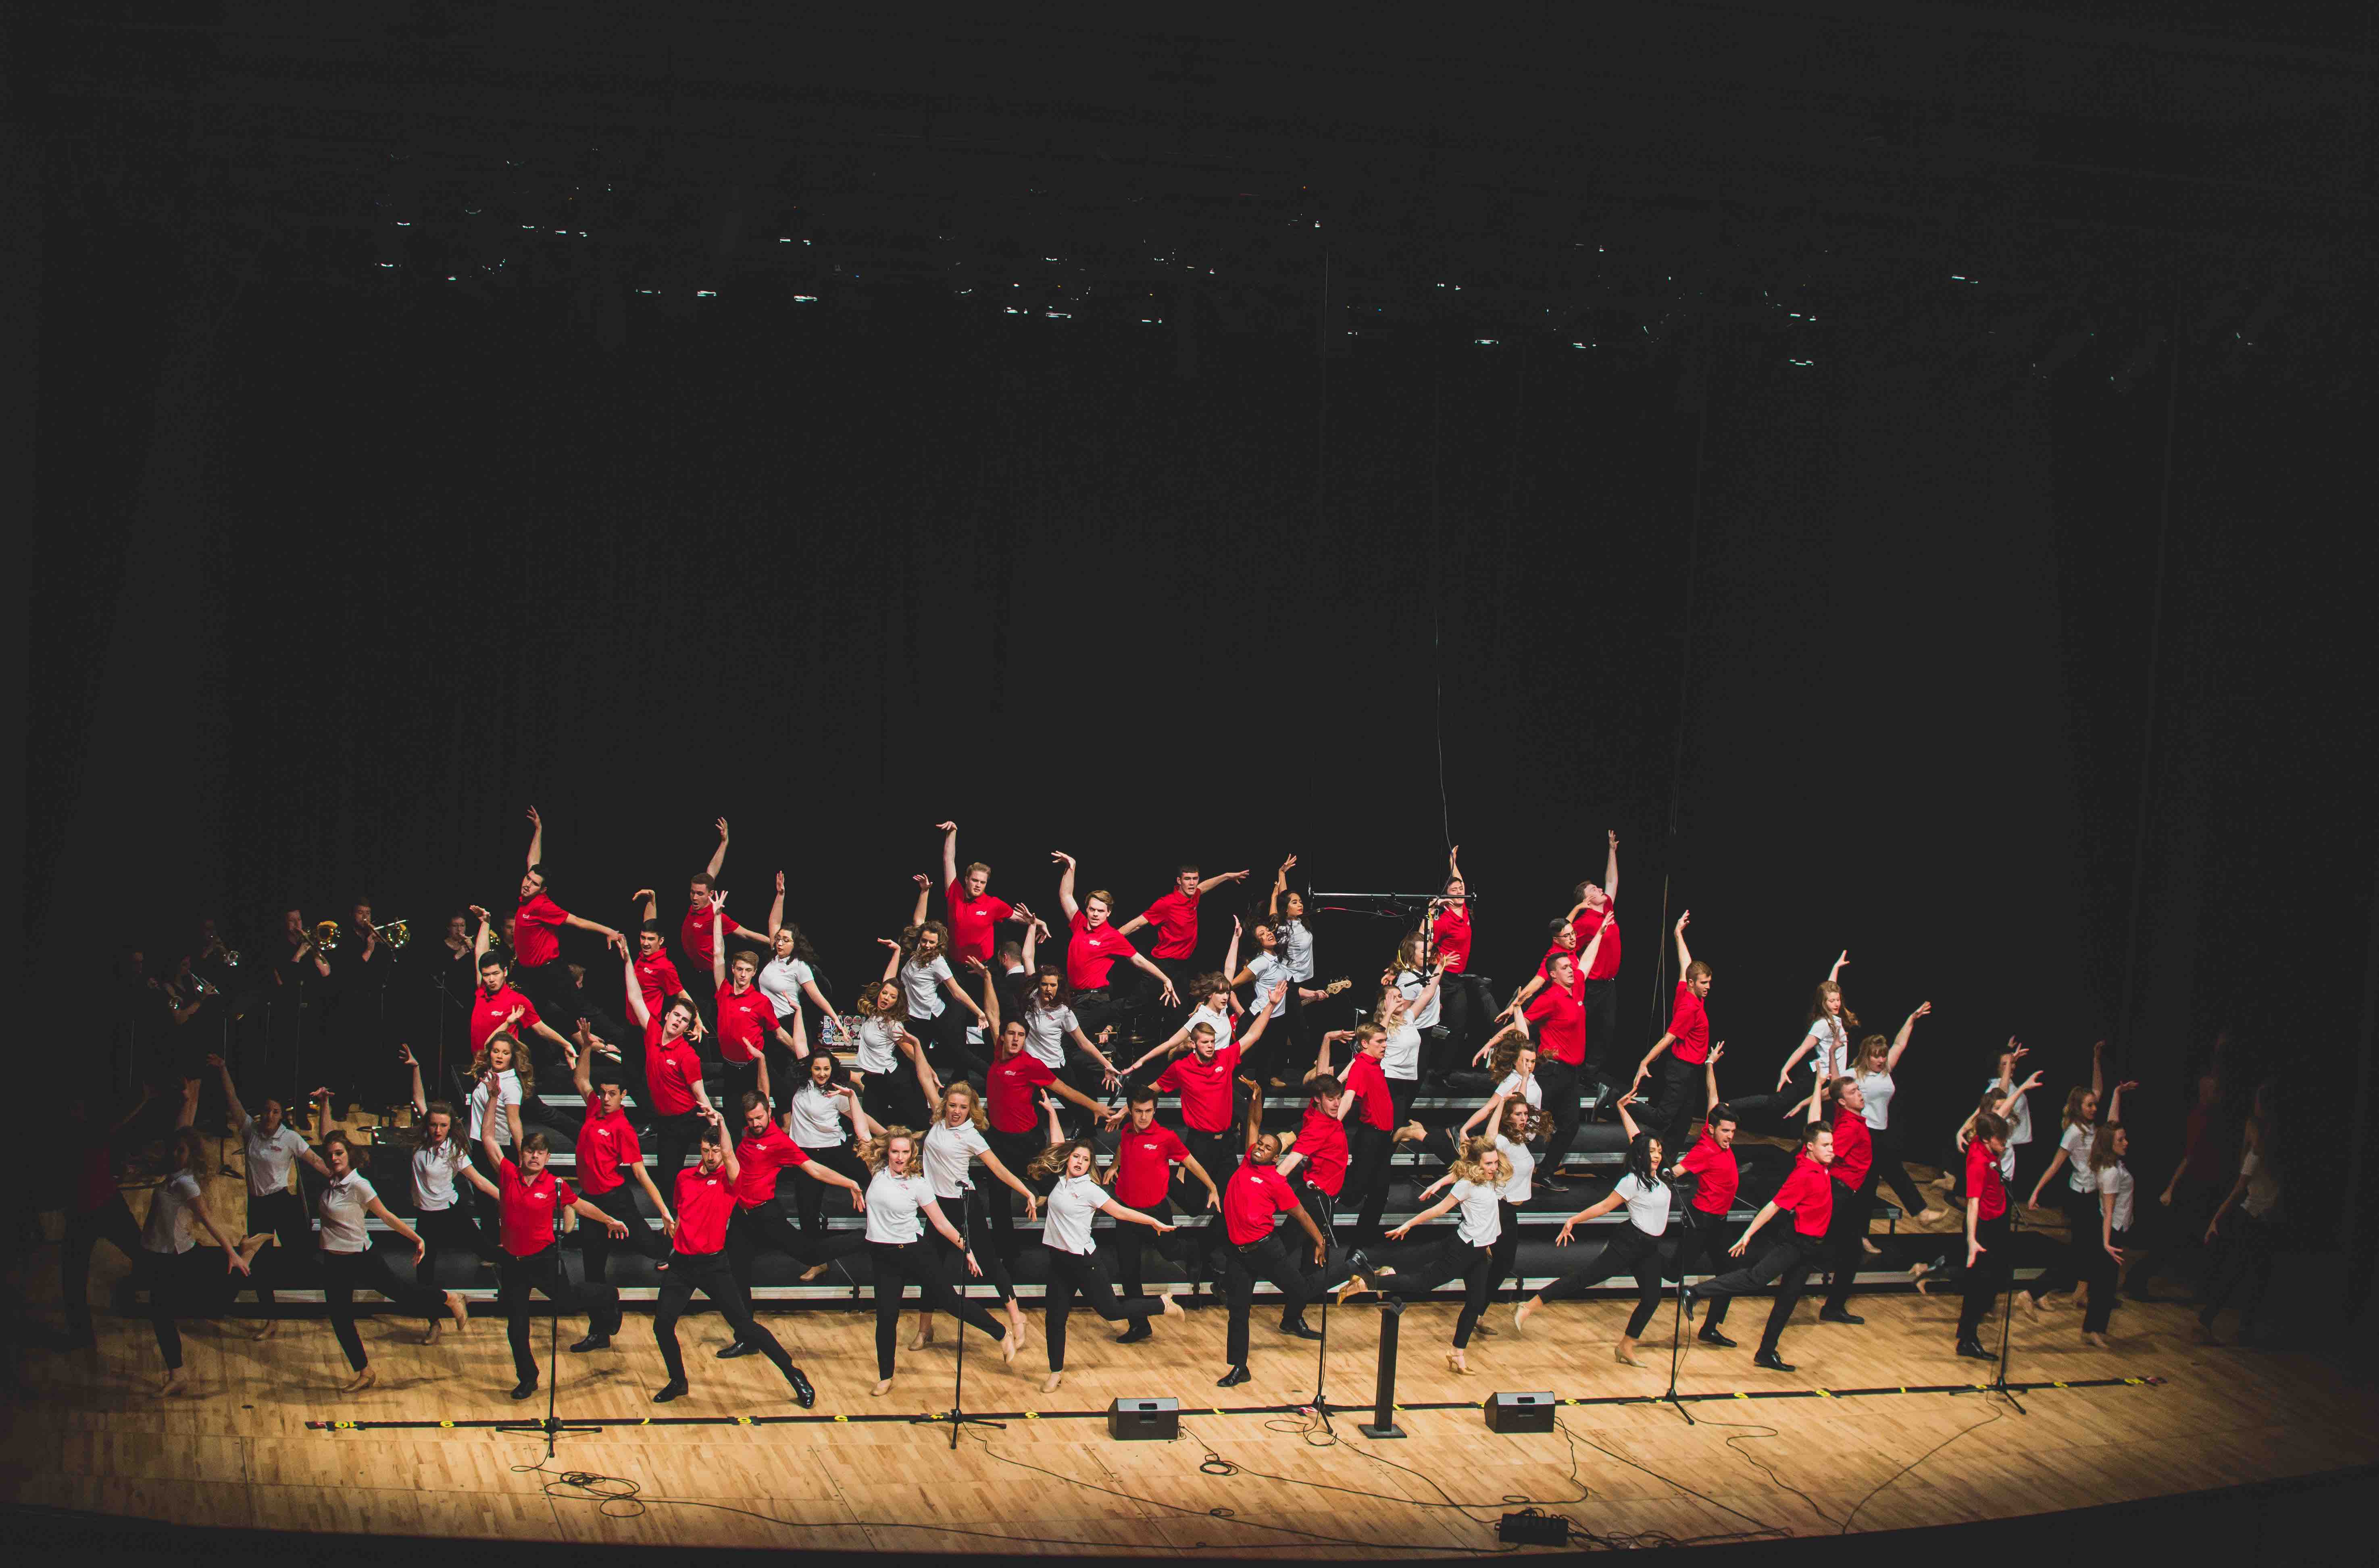 The Big Red Singers will perform May 2 at 7:30 p.m. via live webcast.